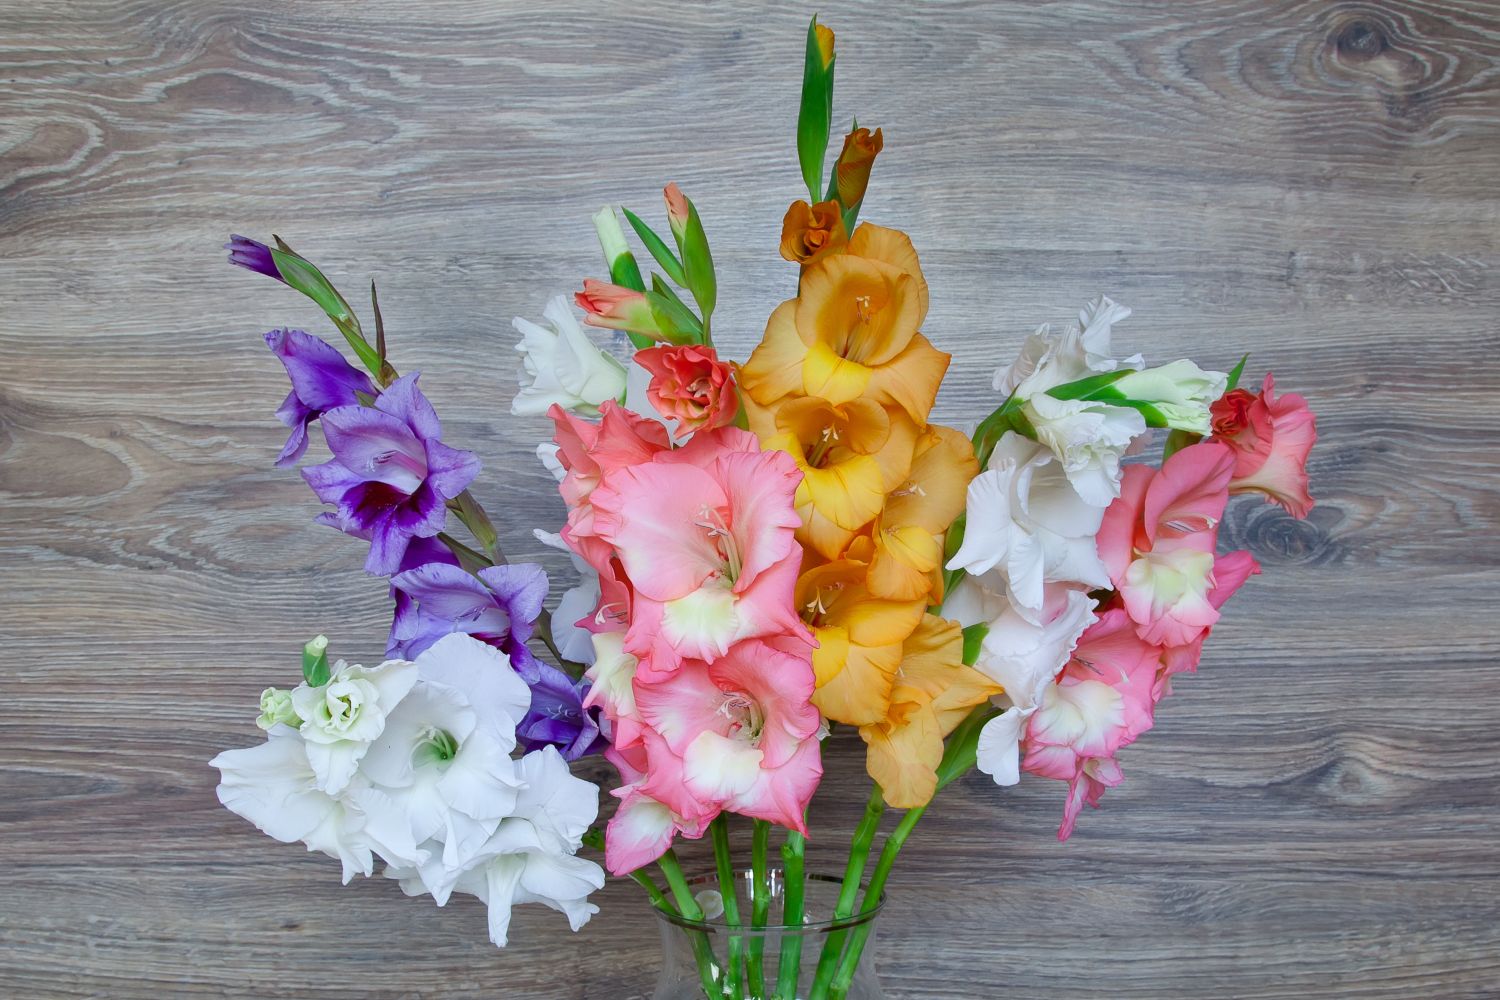 How To Cut Gladiolus For Vase